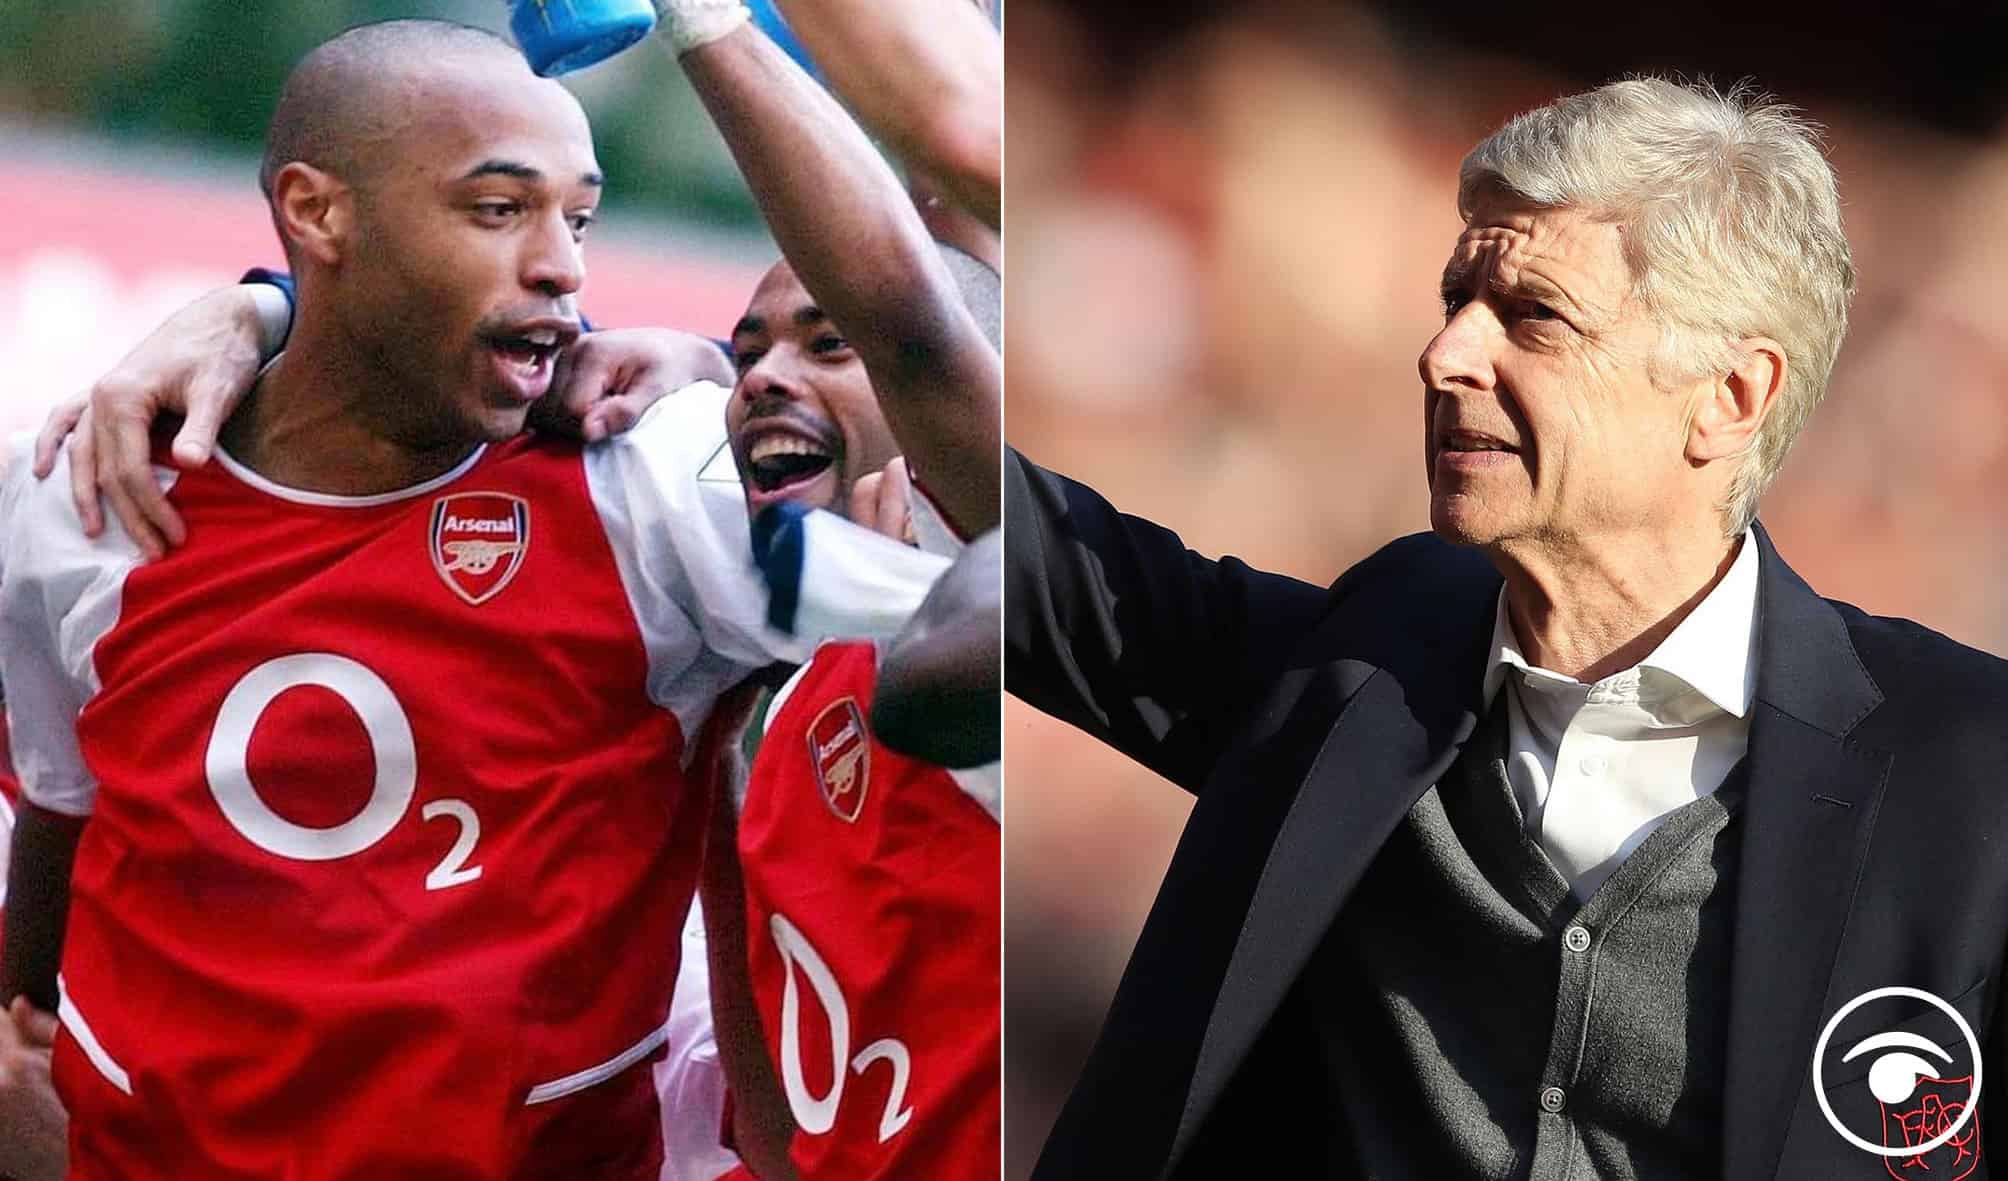 On this day 23 years ago Arsenal signed Thierry Henry and the rest is history